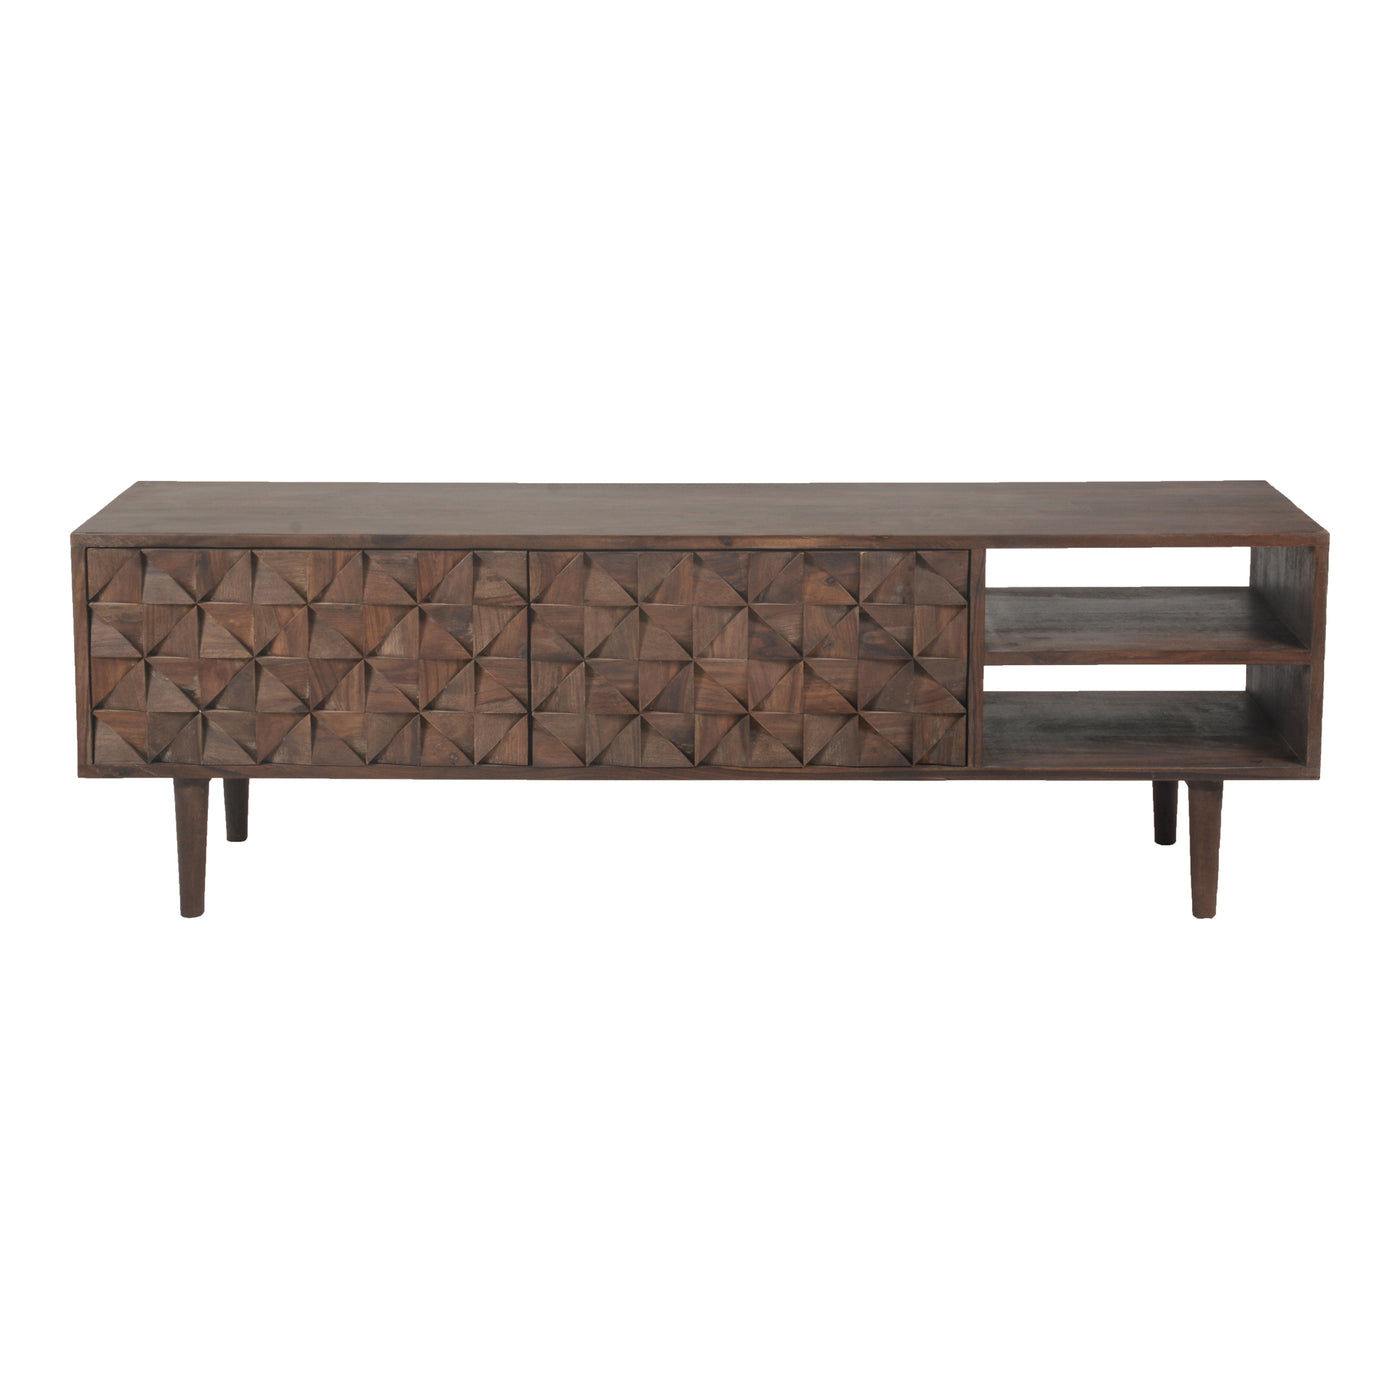 A mid-century design wonder, the Pablo Entertainment Unit's creative woodwork adds a modern flair to the classic style. Ma...